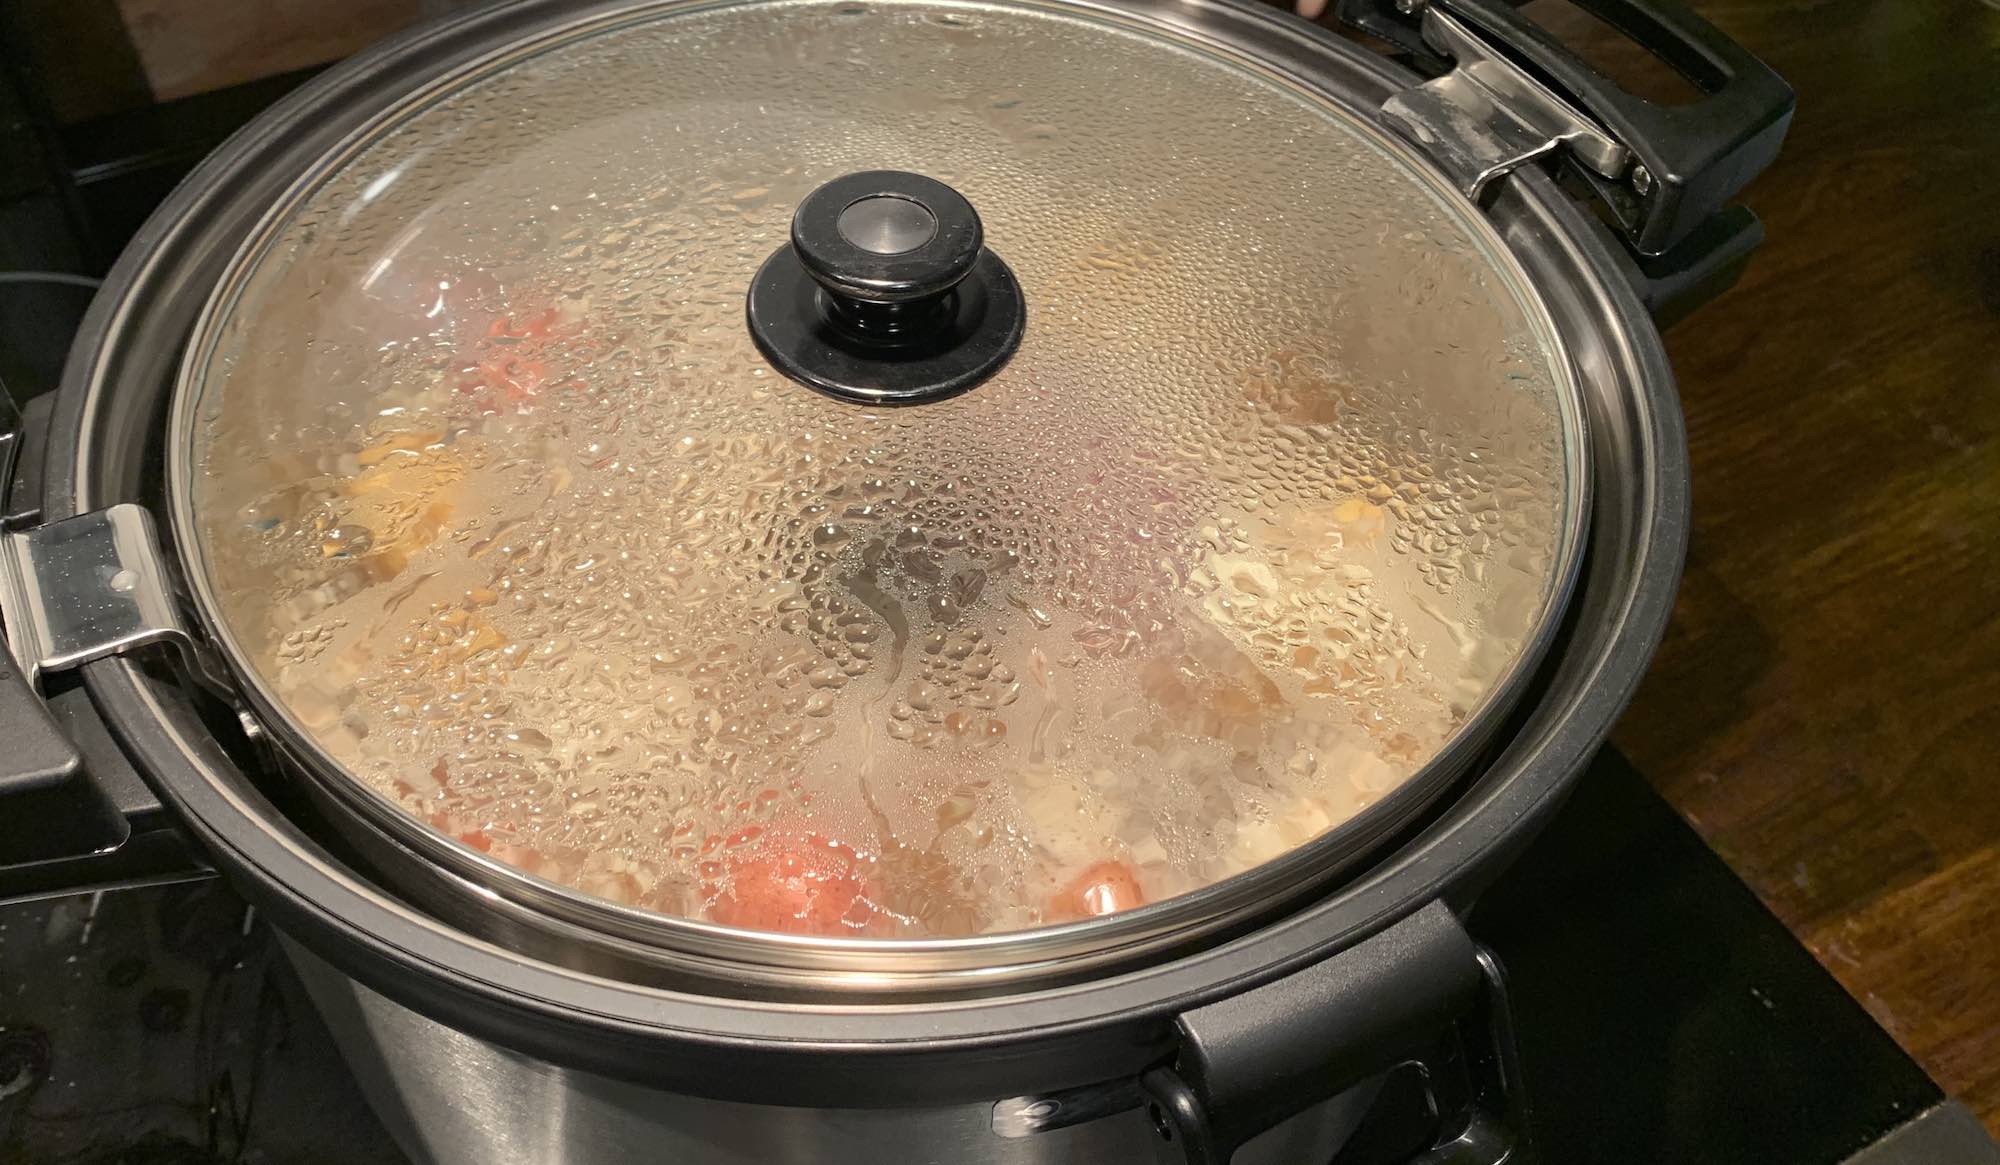 The Best Thermal Cooker Reviews For 2018